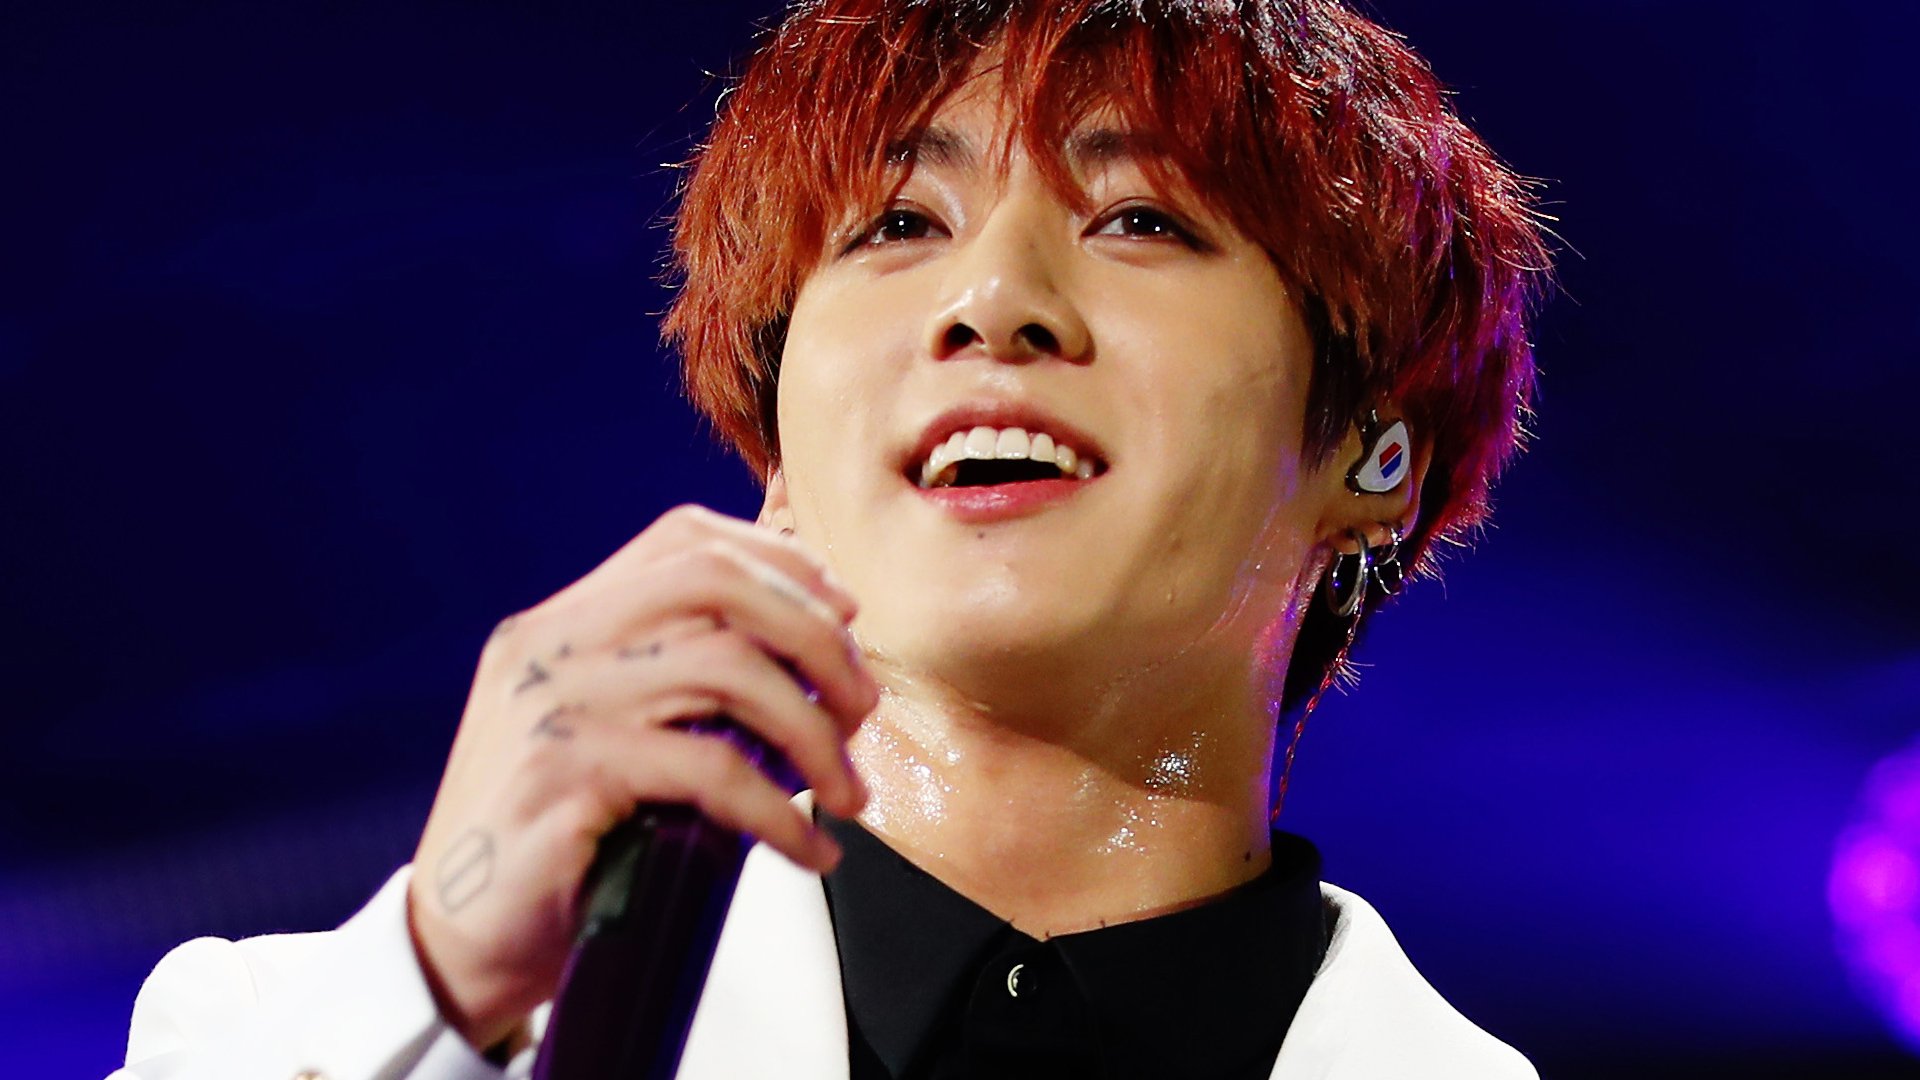 Jungkook of BTS performs onstage during 102.7 KIIS FM's Jingle Ball 2019 Presented by Capital One at the Forum on December 6, 2019 in Los Angeles, California.